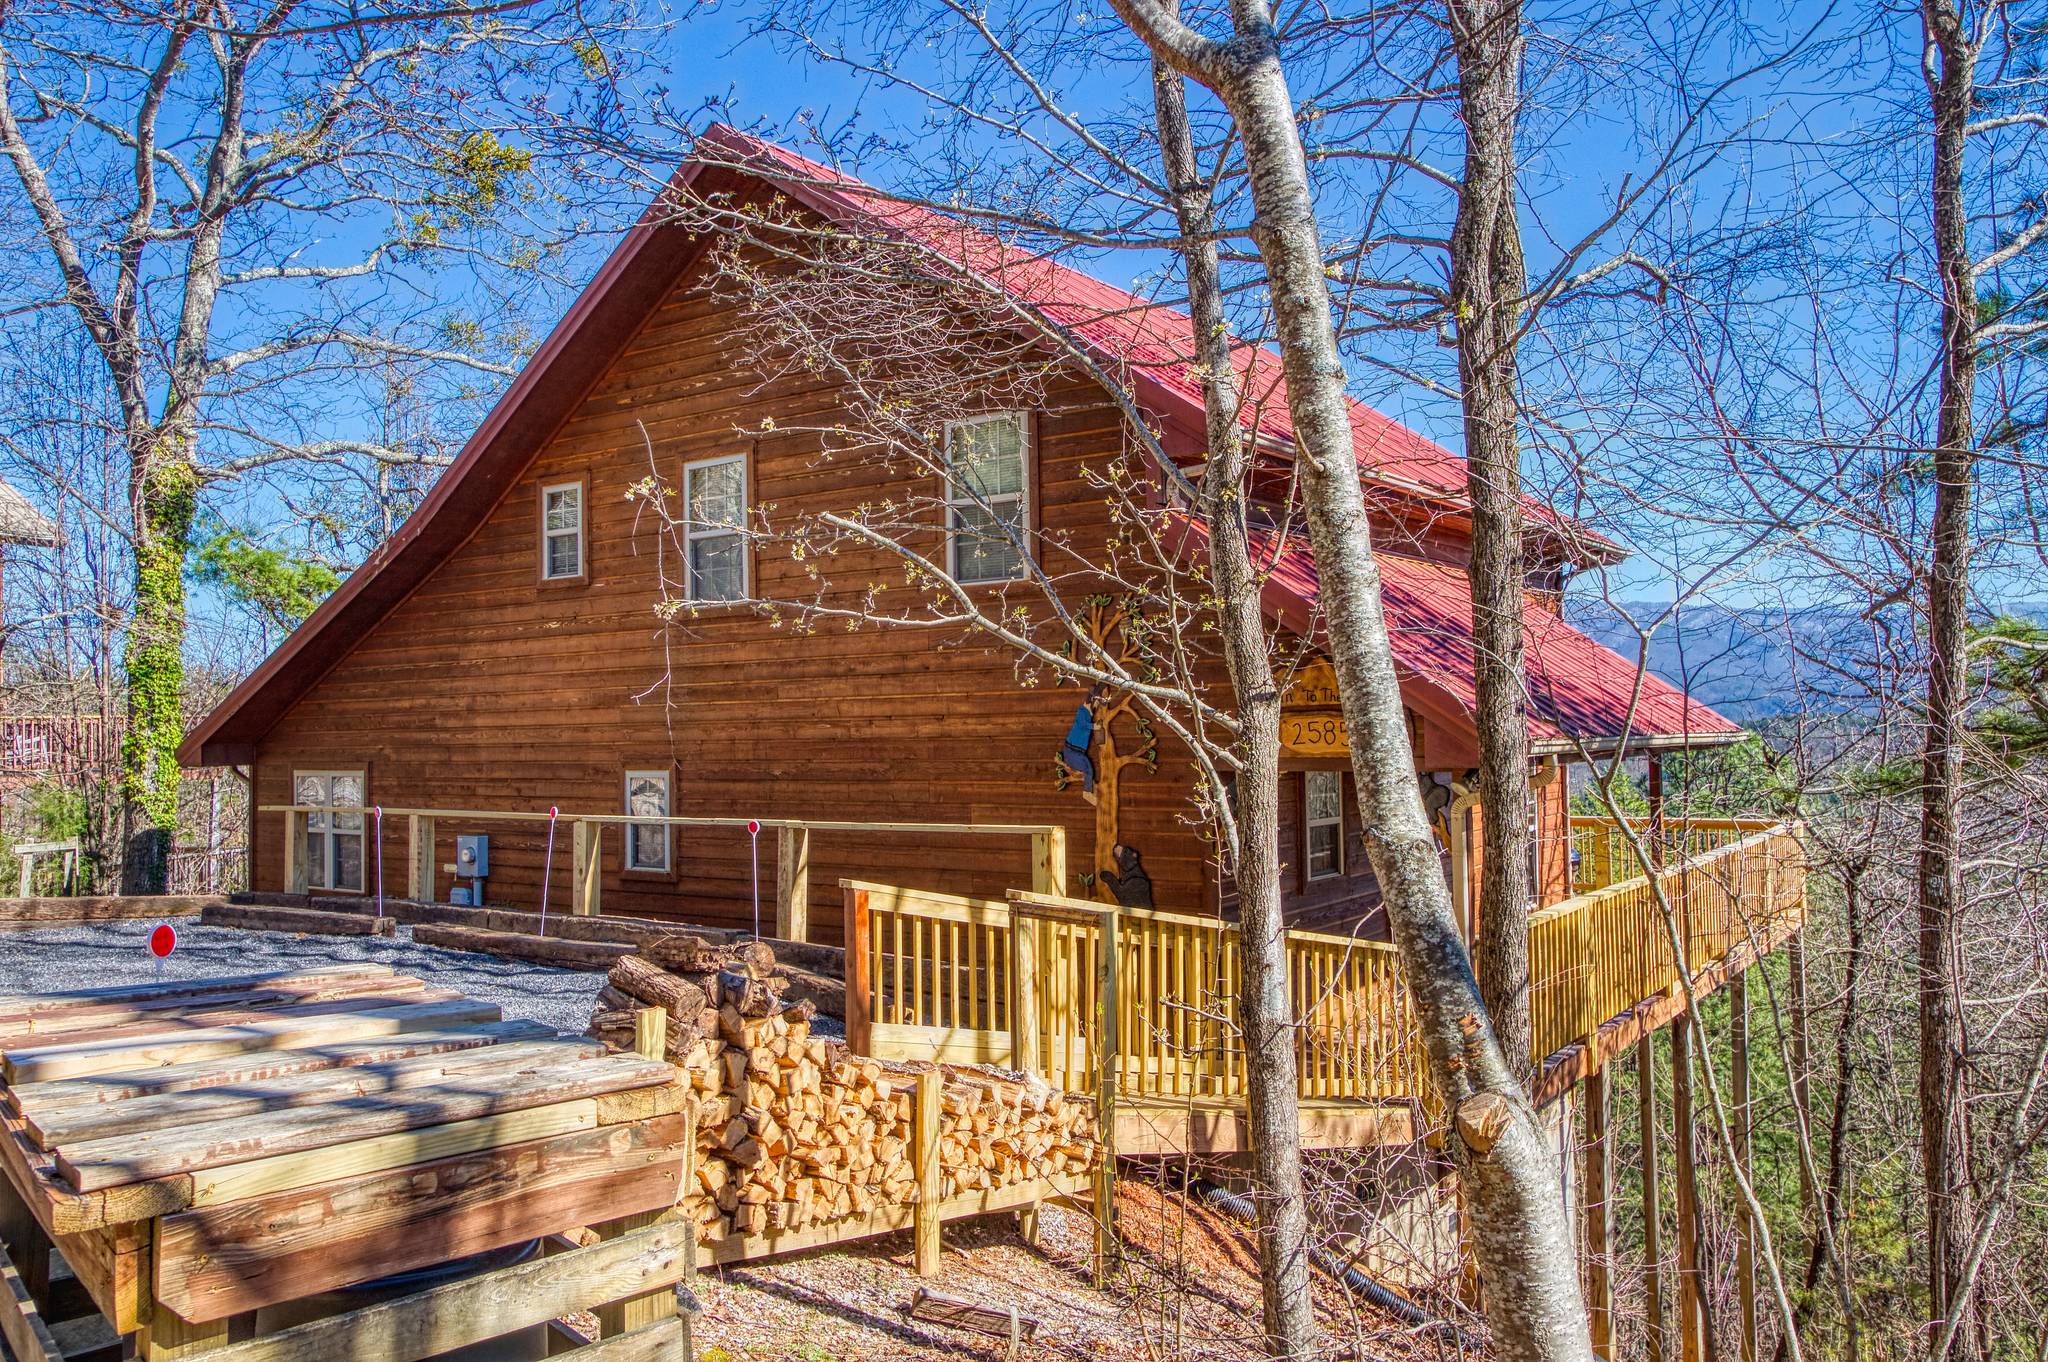 Run to the Hills | RE/MAX Cove Mountain Realty & Cabins